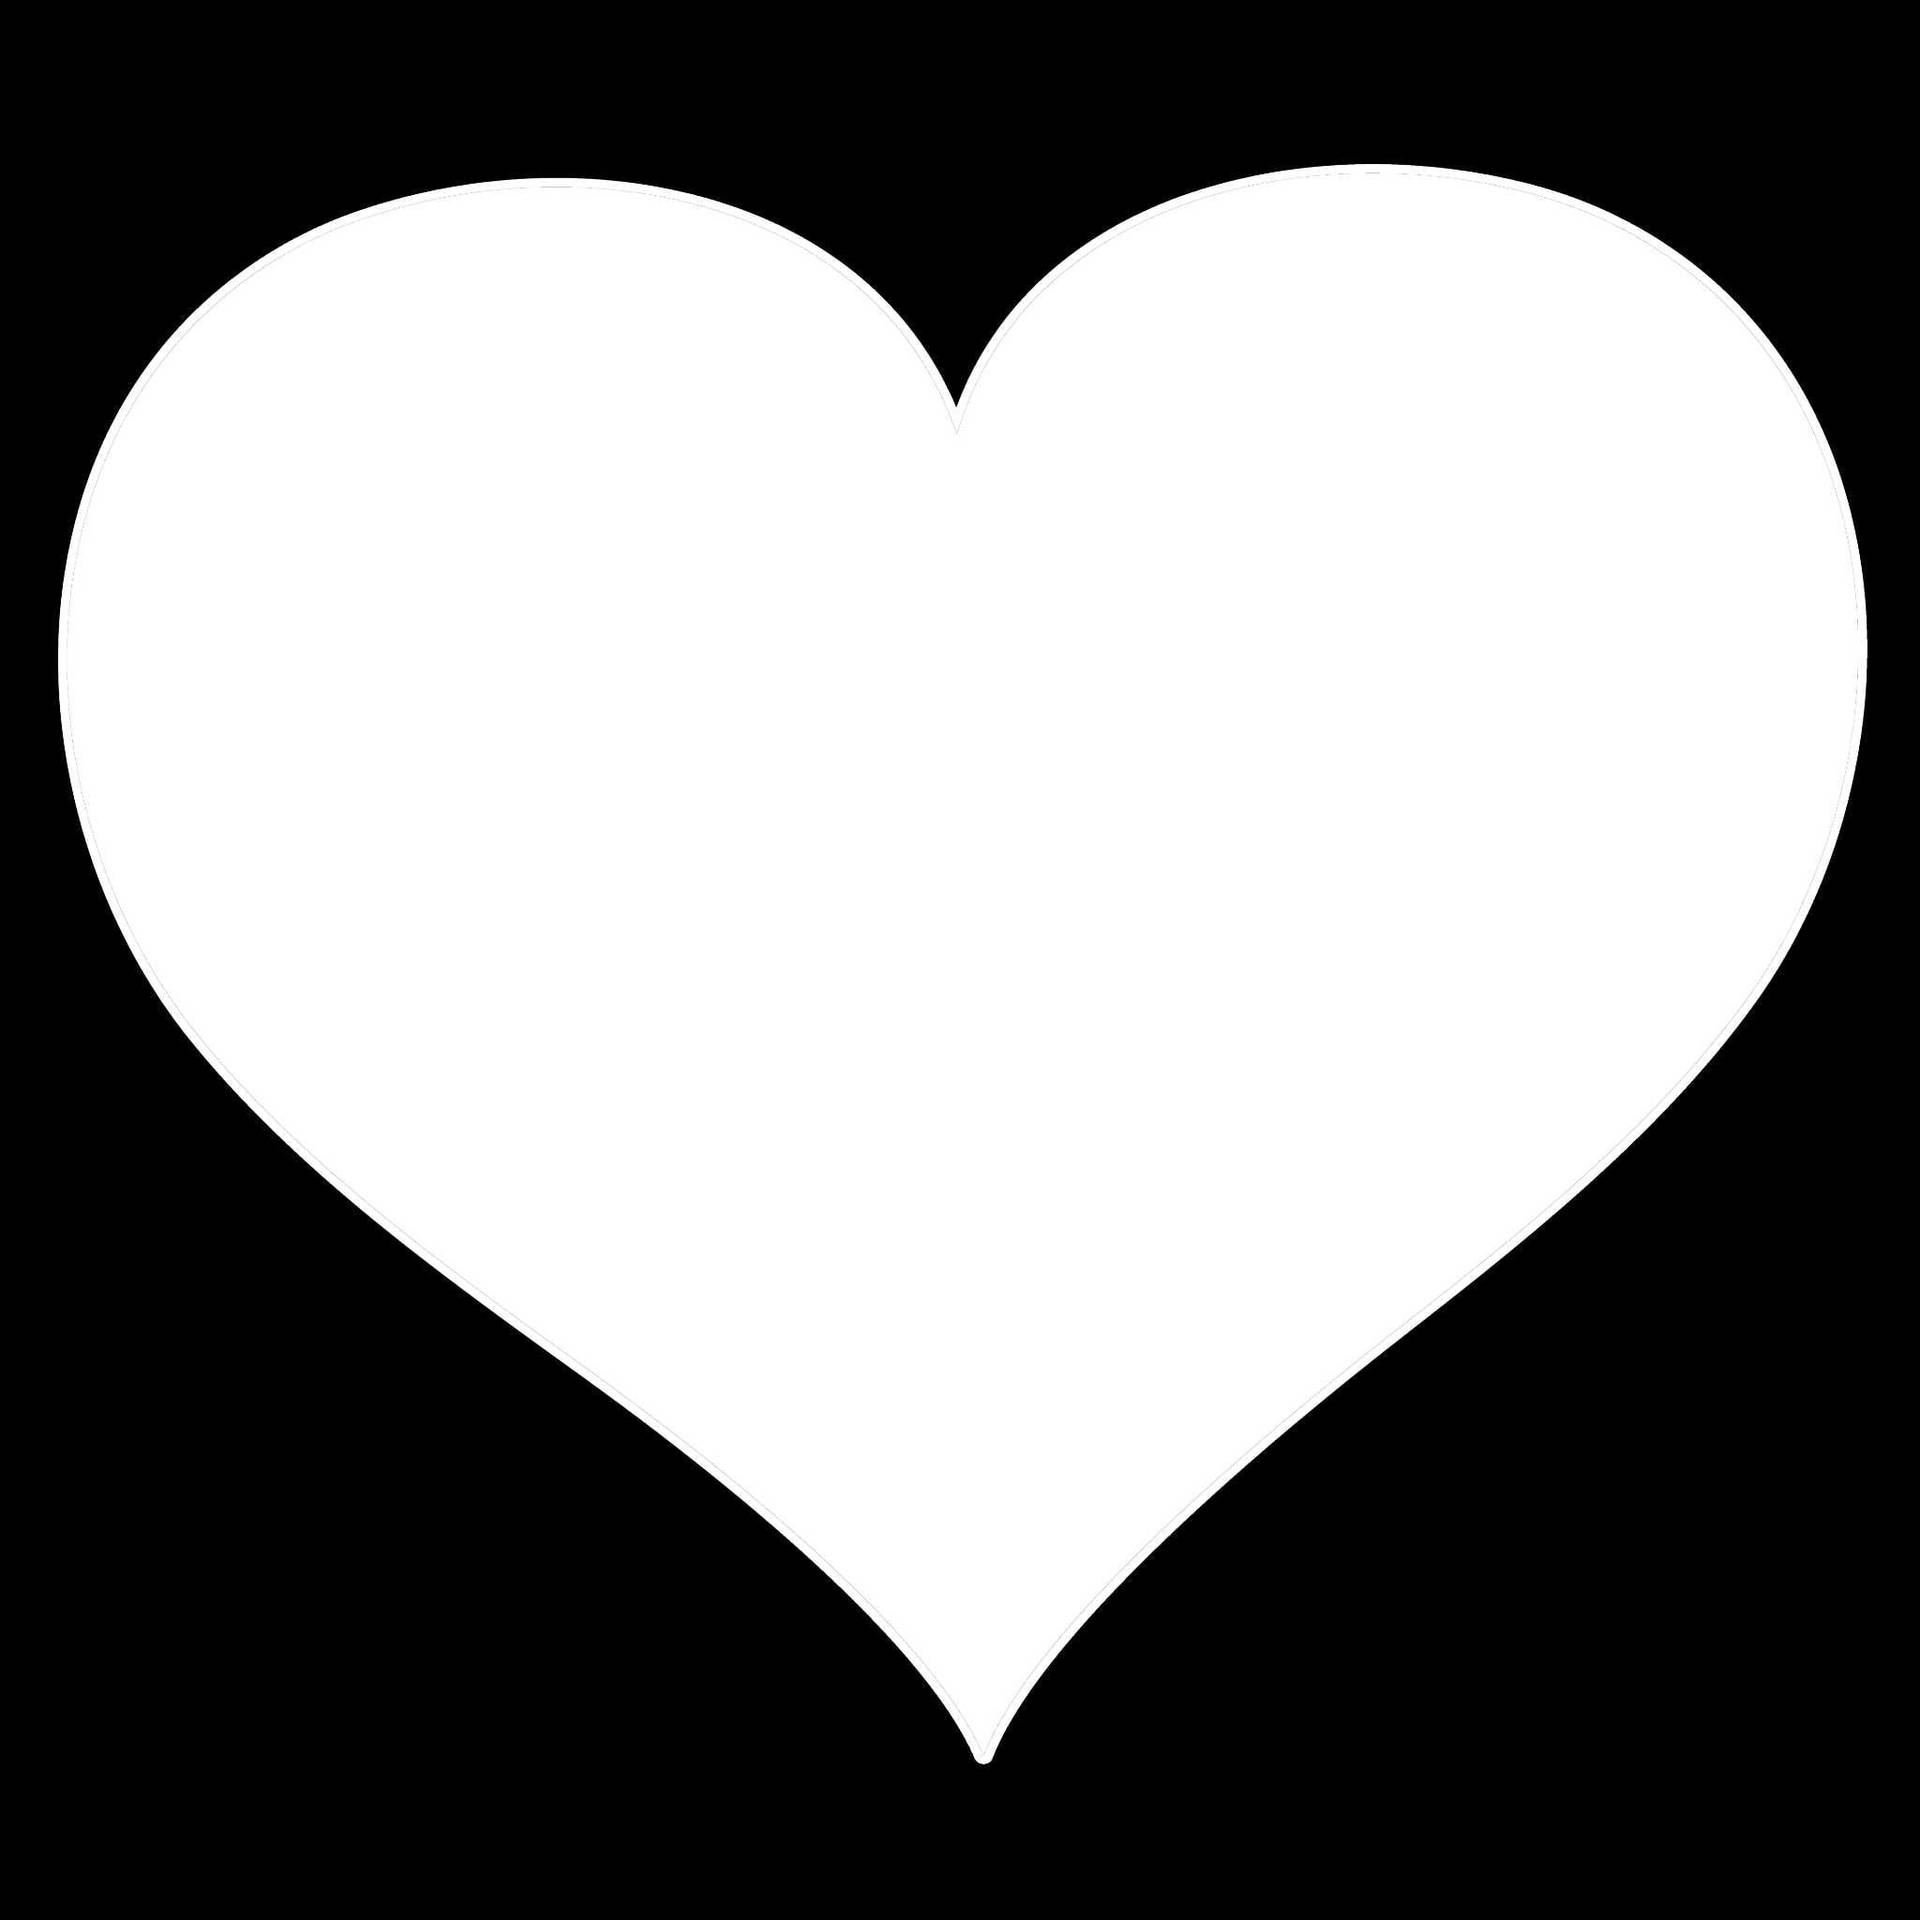 Large Black And White Heart Wallpaper